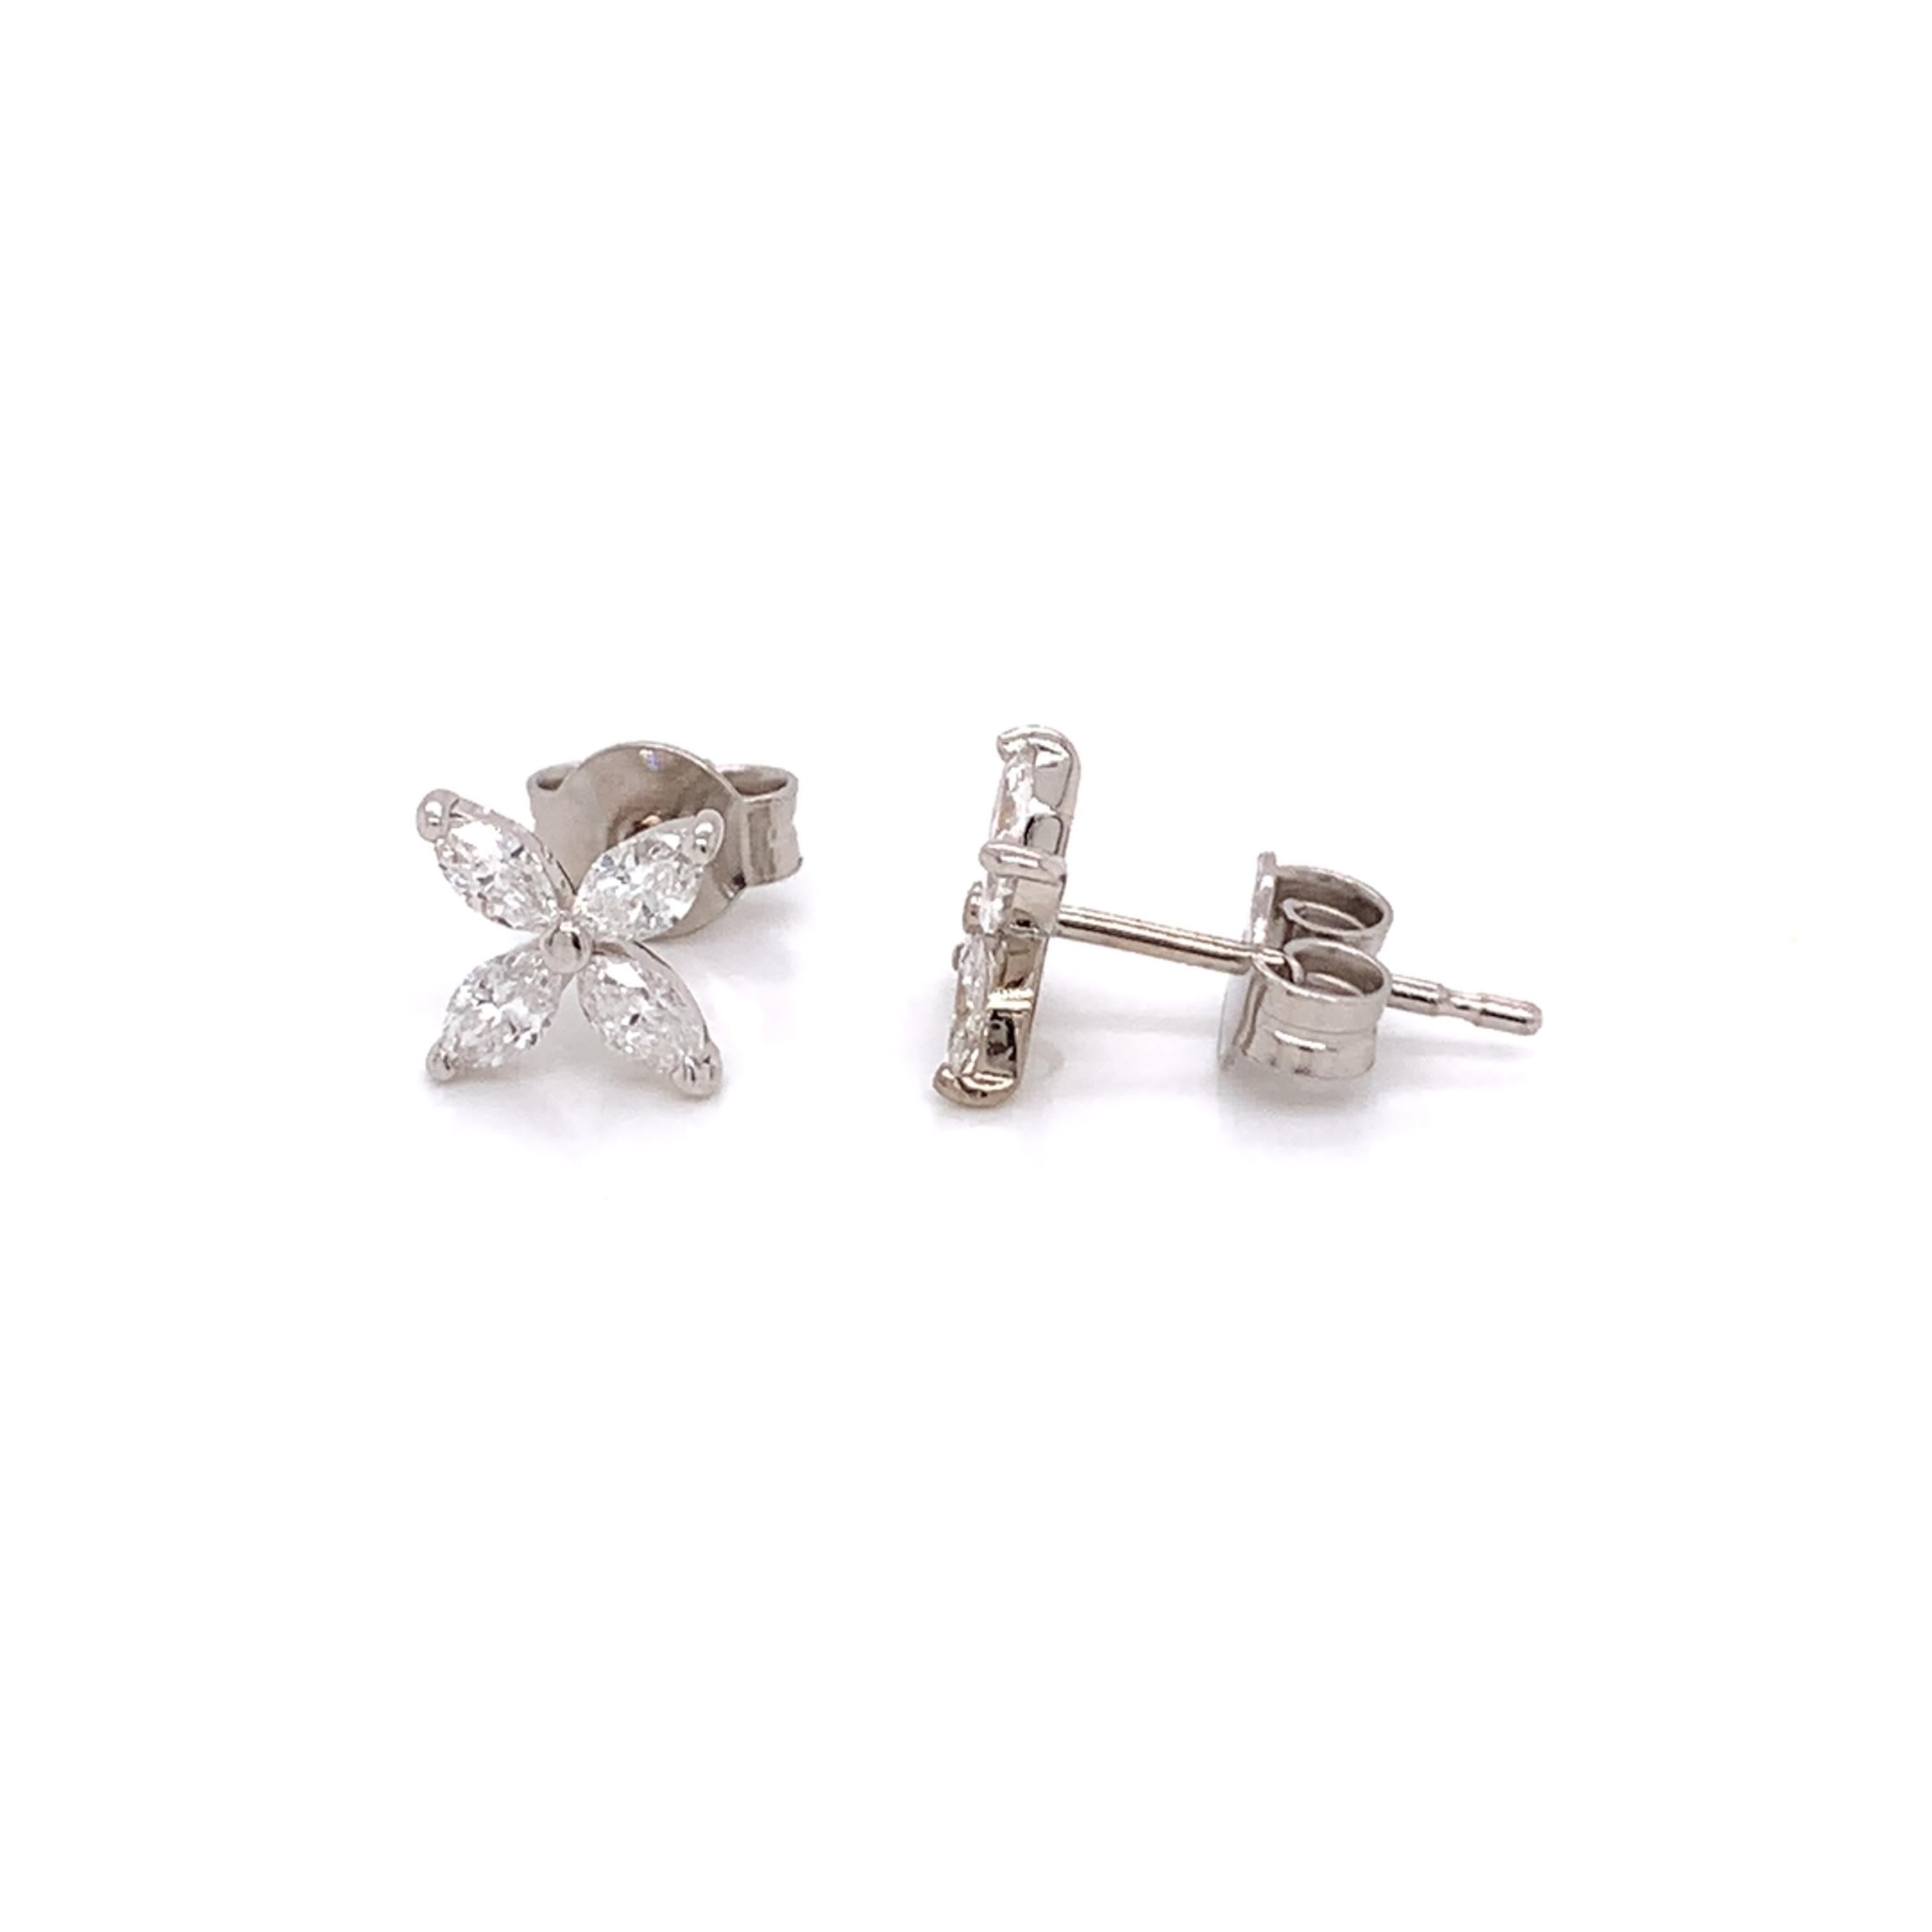 Flower shaped diamond earrings made with real/natural oval shaped diamonds. Diamond Total Weight: 0.52 carats. Diamond Quantity: 8 (oval shaped diamonds) + 2 (round diamonds). Diamond Color: G-H. Diamond Clarity: VS2-SI1. Mounted on 18kt white gold